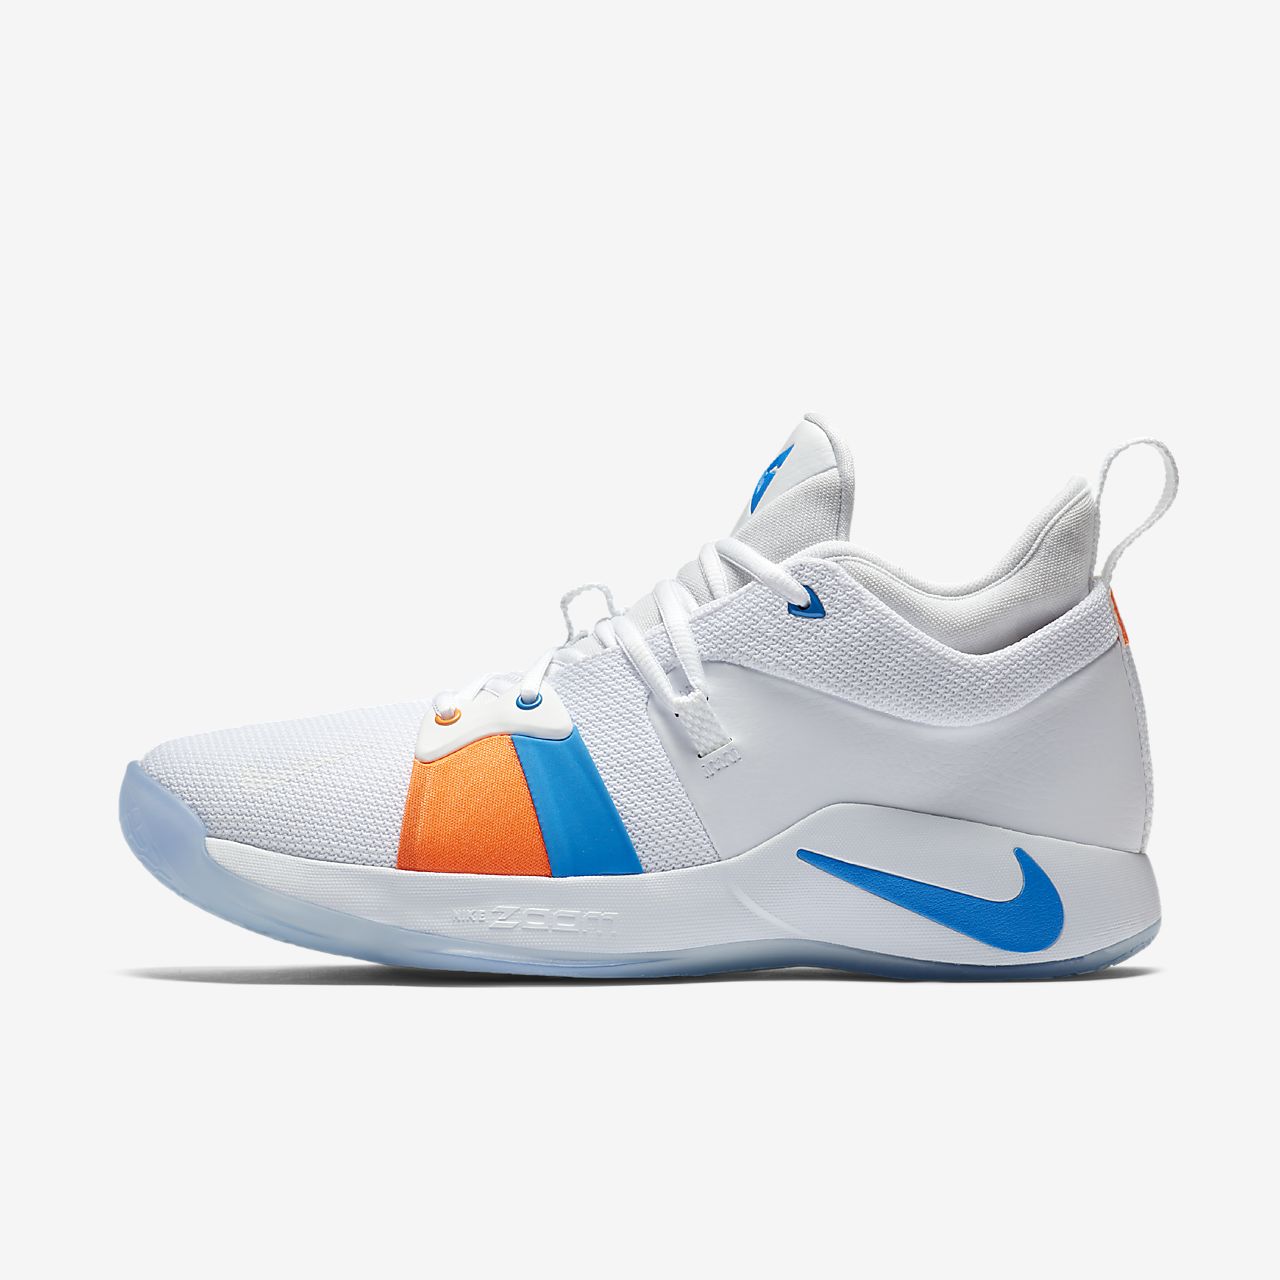 pg 2 shoes white